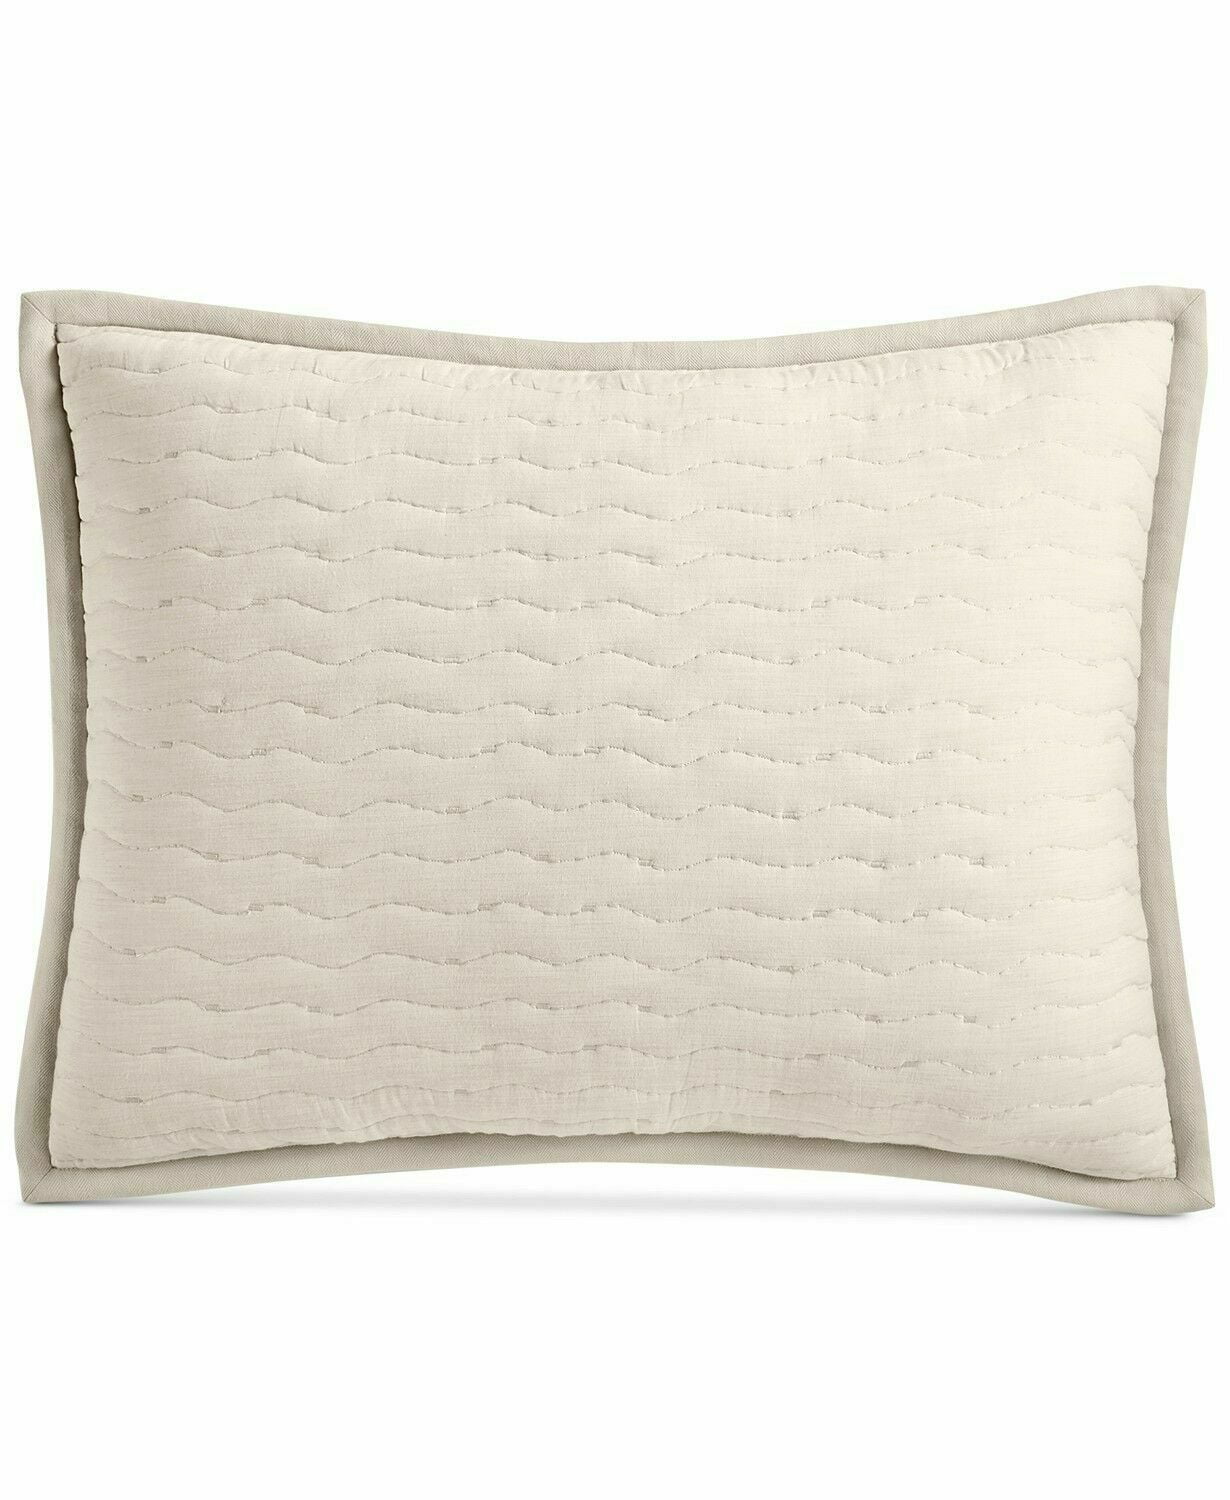 Hotel Collection White Pleated Euro Sham 